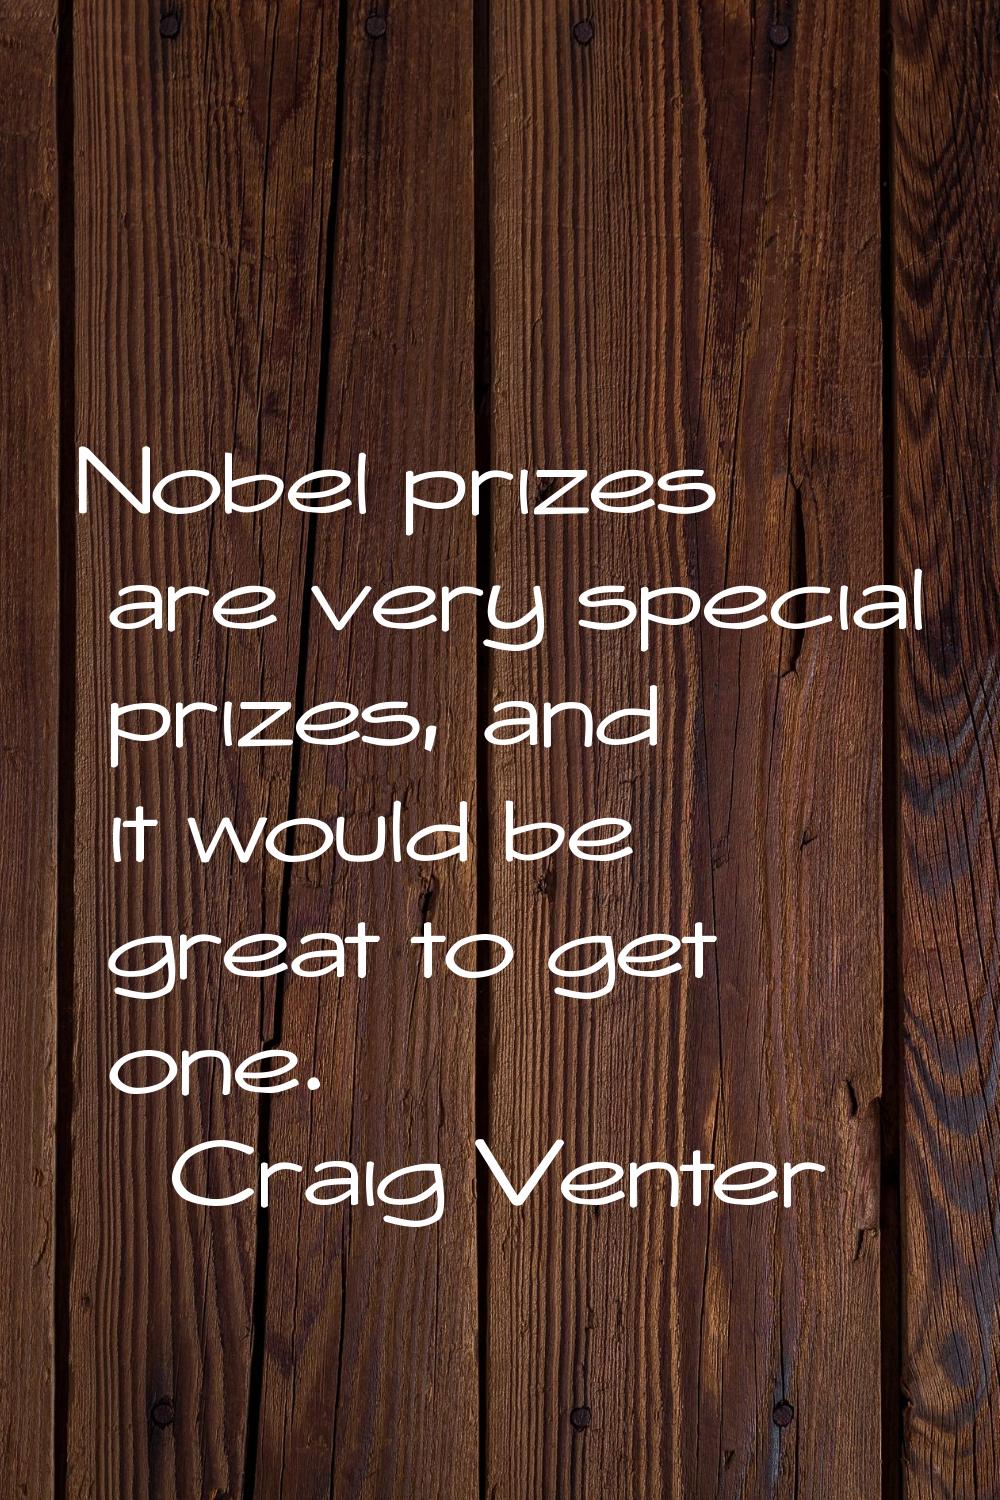 Nobel prizes are very special prizes, and it would be great to get one.